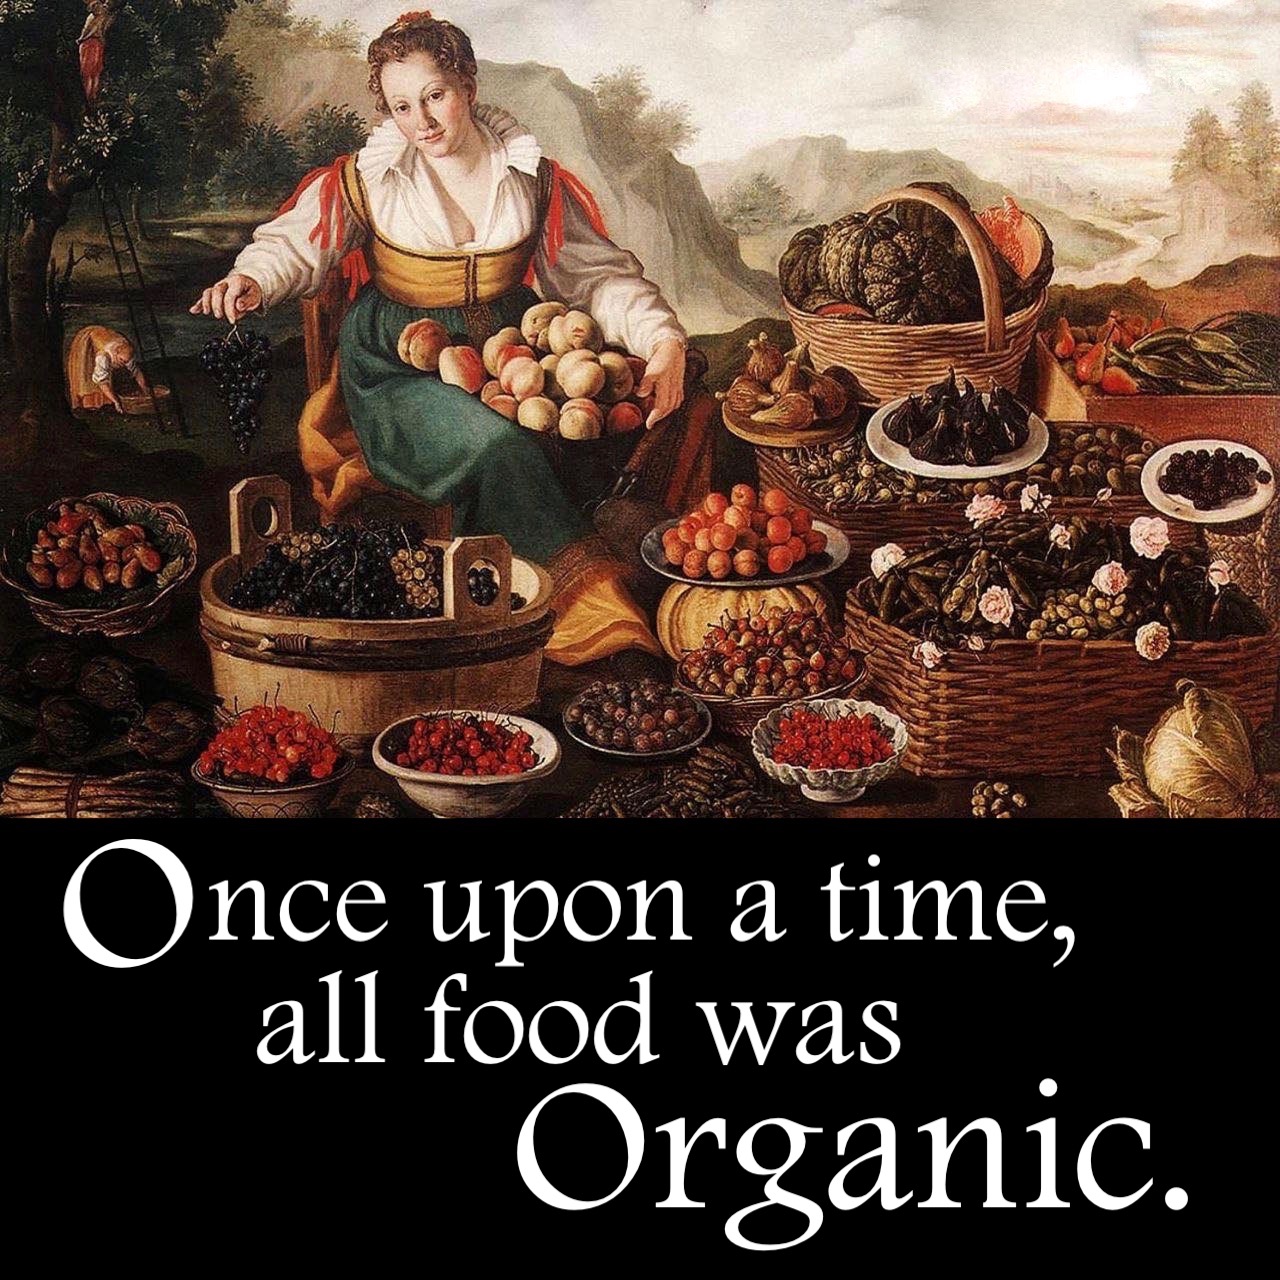 once upon a time, all food was organic